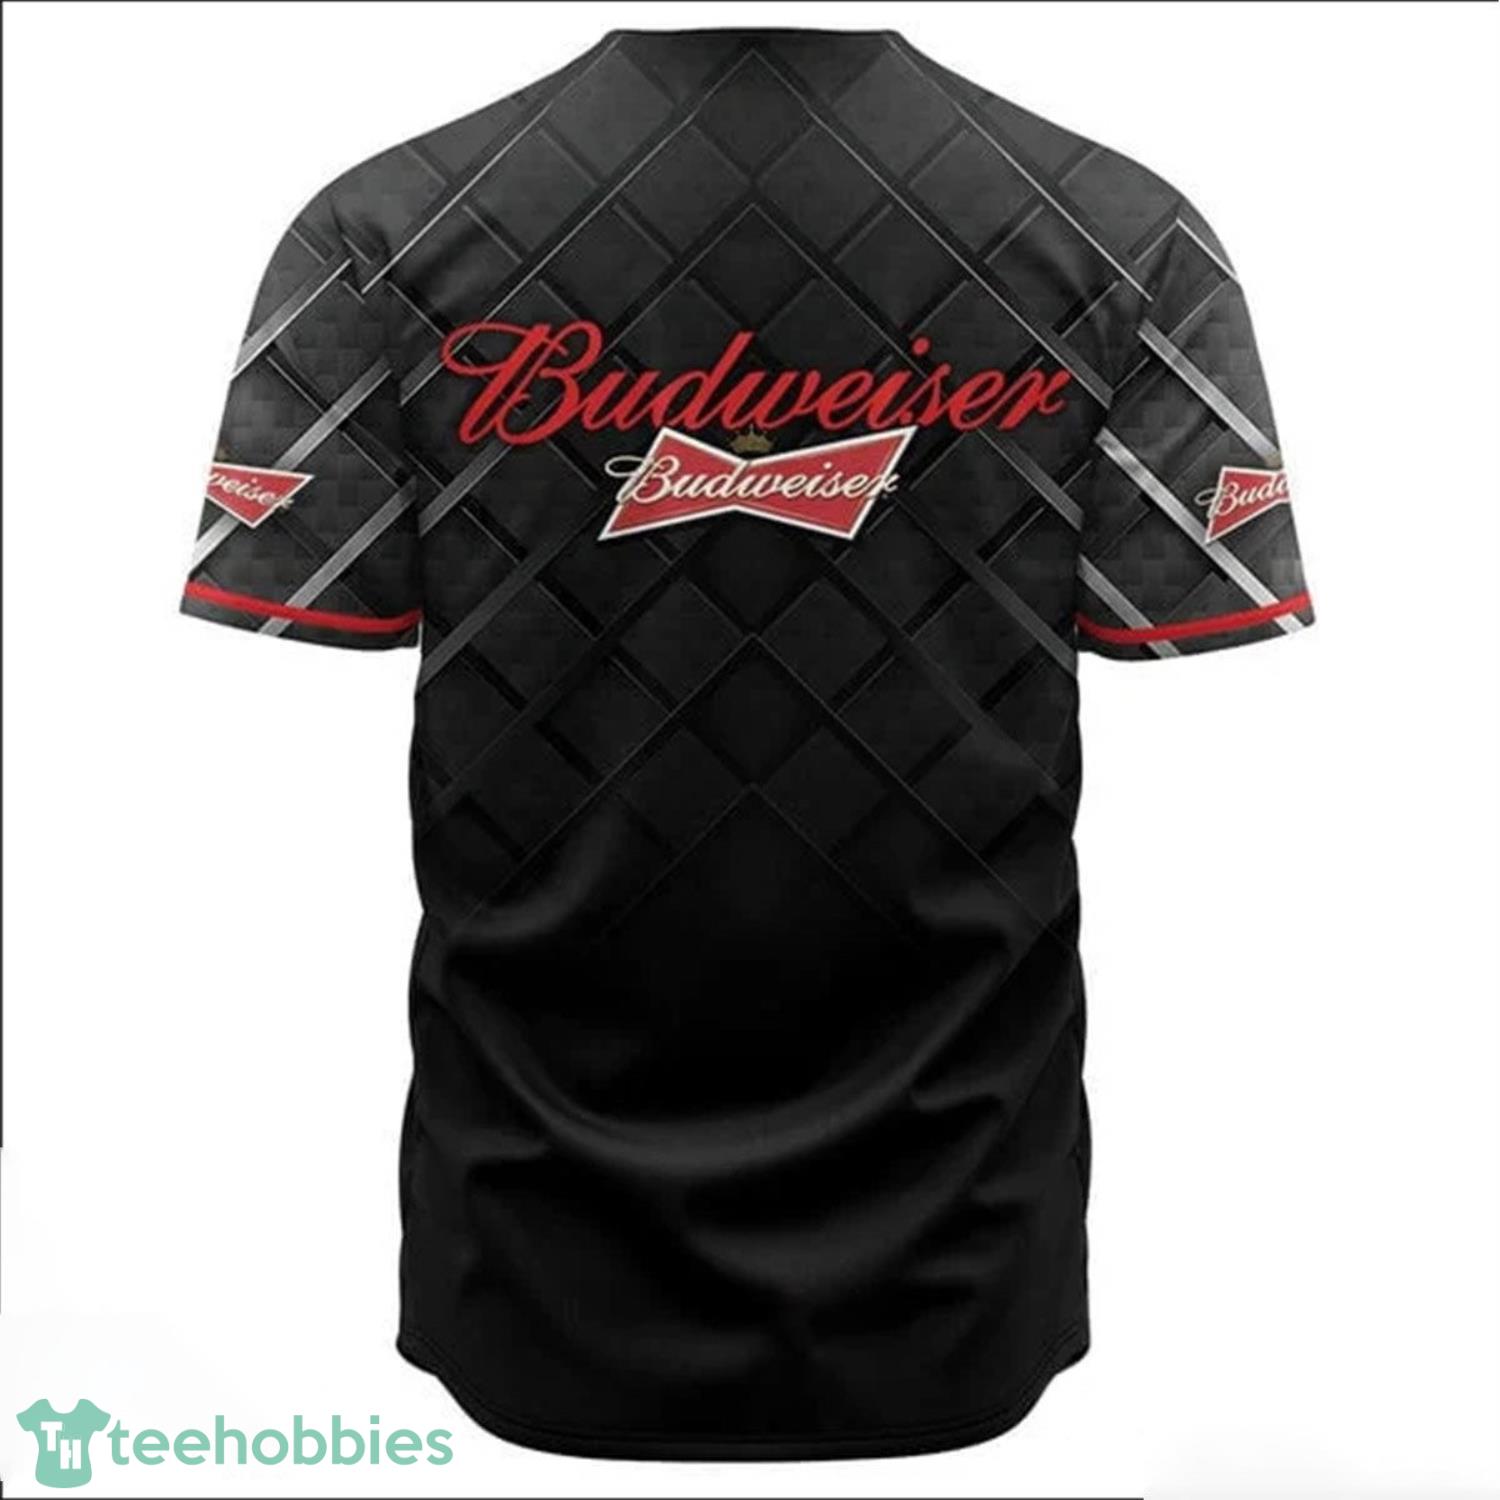 Personalized Vintage Budweiser Jersey Shirt Product Photo 1